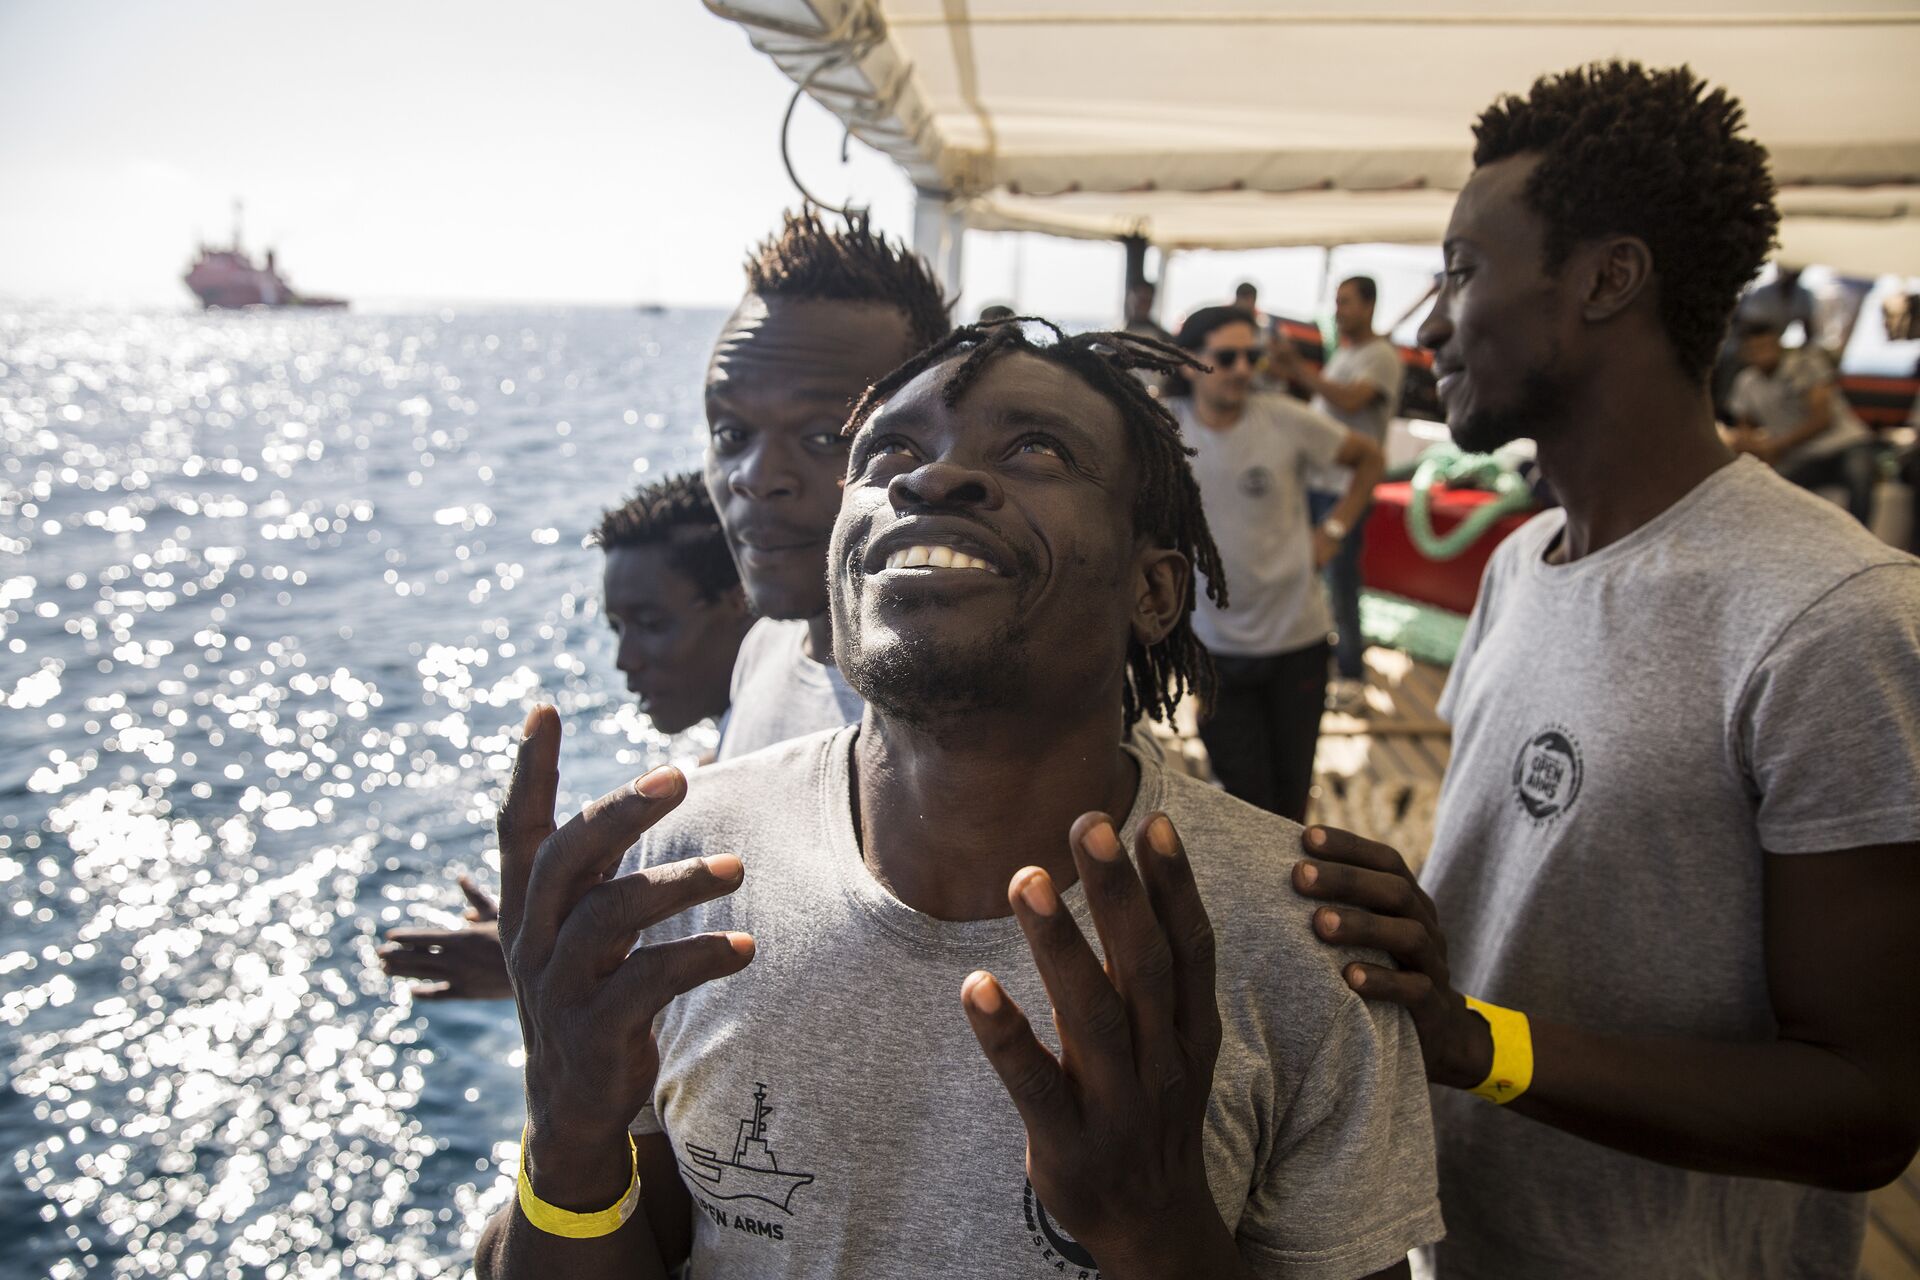 Migrants aboard the Open Arms aid boat, of Proactiva Open Arms Spanish NGO, react as the ship approaches the port of Barcelona, Spain, Wednesday, July 4, 2018. The aid boat sailed to Spain with 60 migrants rescued on Saturday in waters near Libya, after it was rejected by both Italy and Malta - Sputnik International, 1920, 20.12.2021